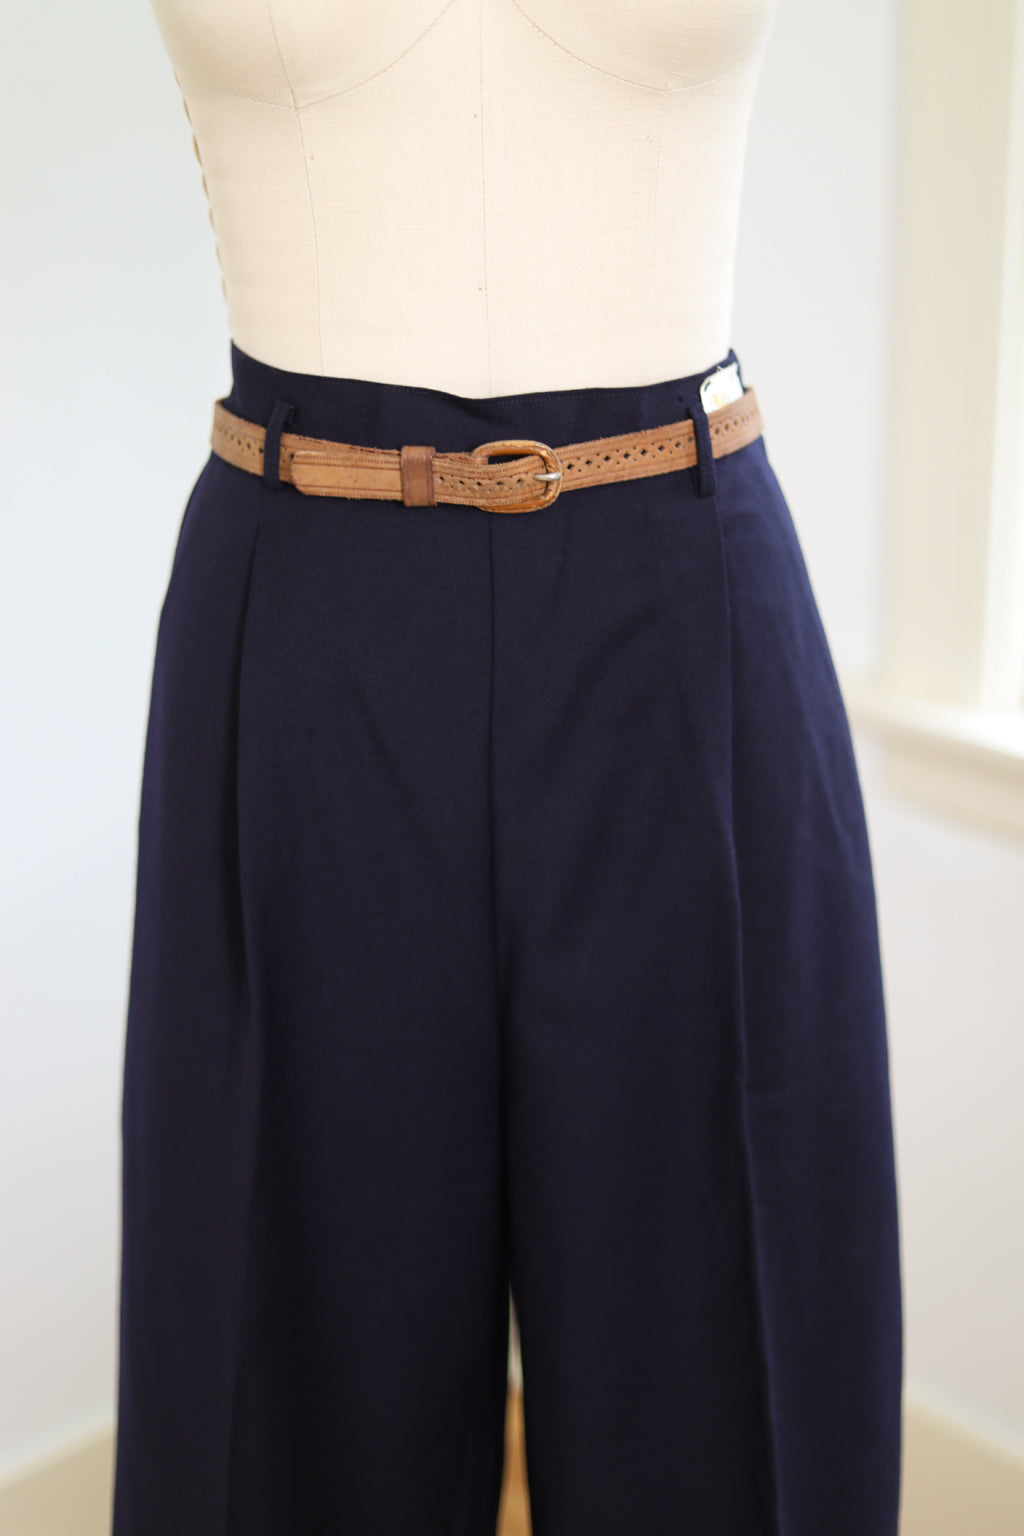 Vintage 1940s RARE Deadstock Wide Leg Culottes Pants - Navy Twill Sport Cropped Trousers Size L to XL